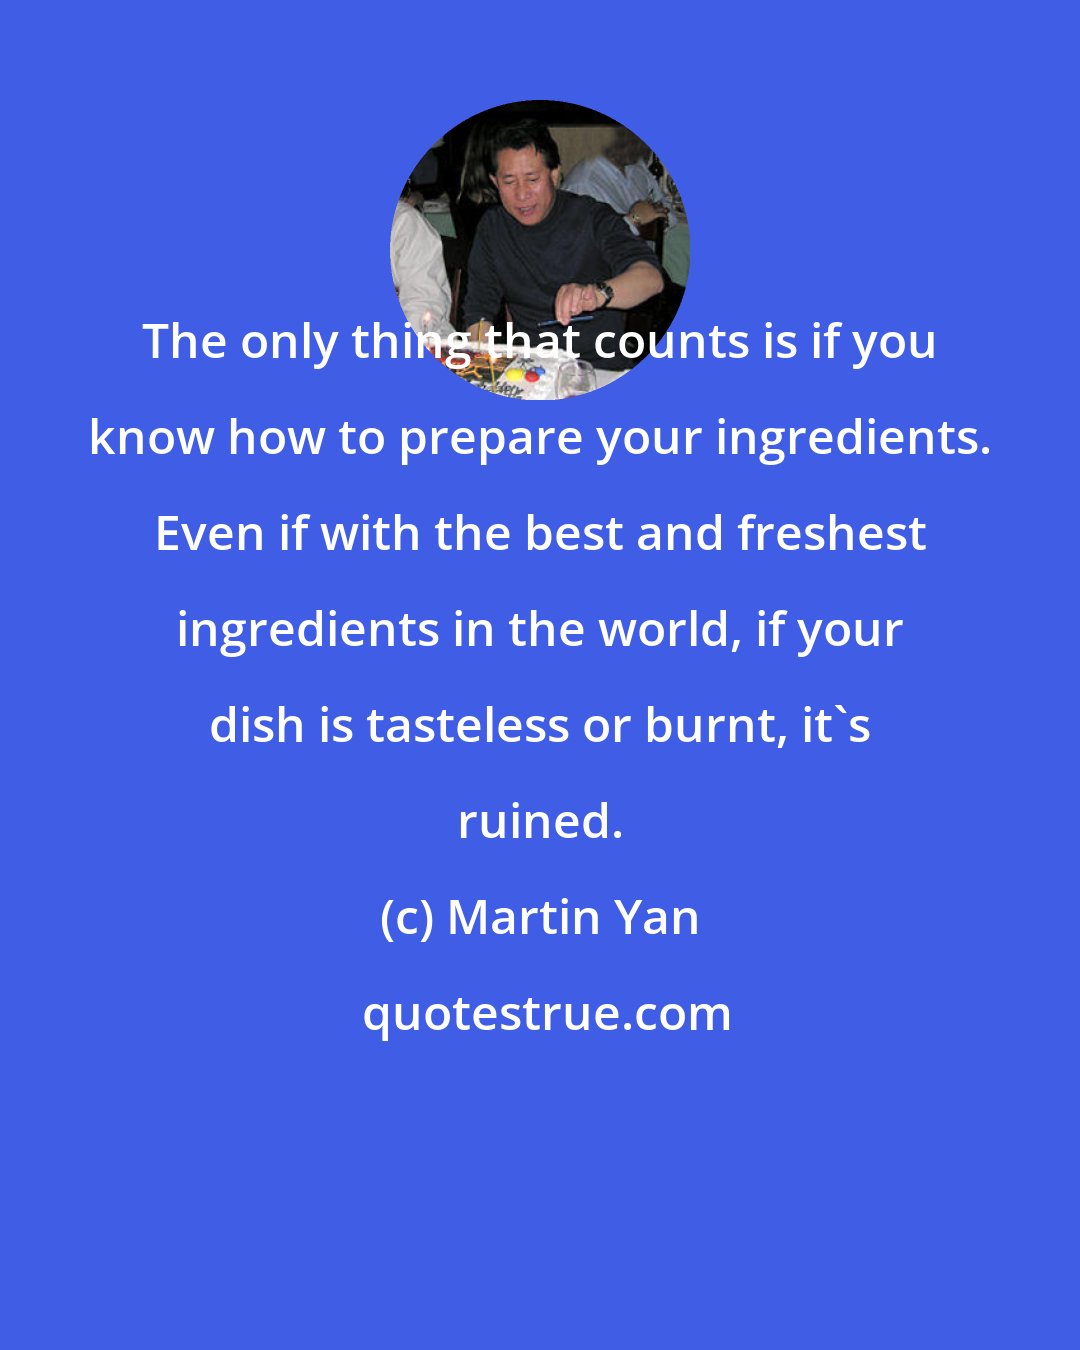 Martin Yan: The only thing that counts is if you know how to prepare your ingredients. Even if with the best and freshest ingredients in the world, if your dish is tasteless or burnt, it's ruined.